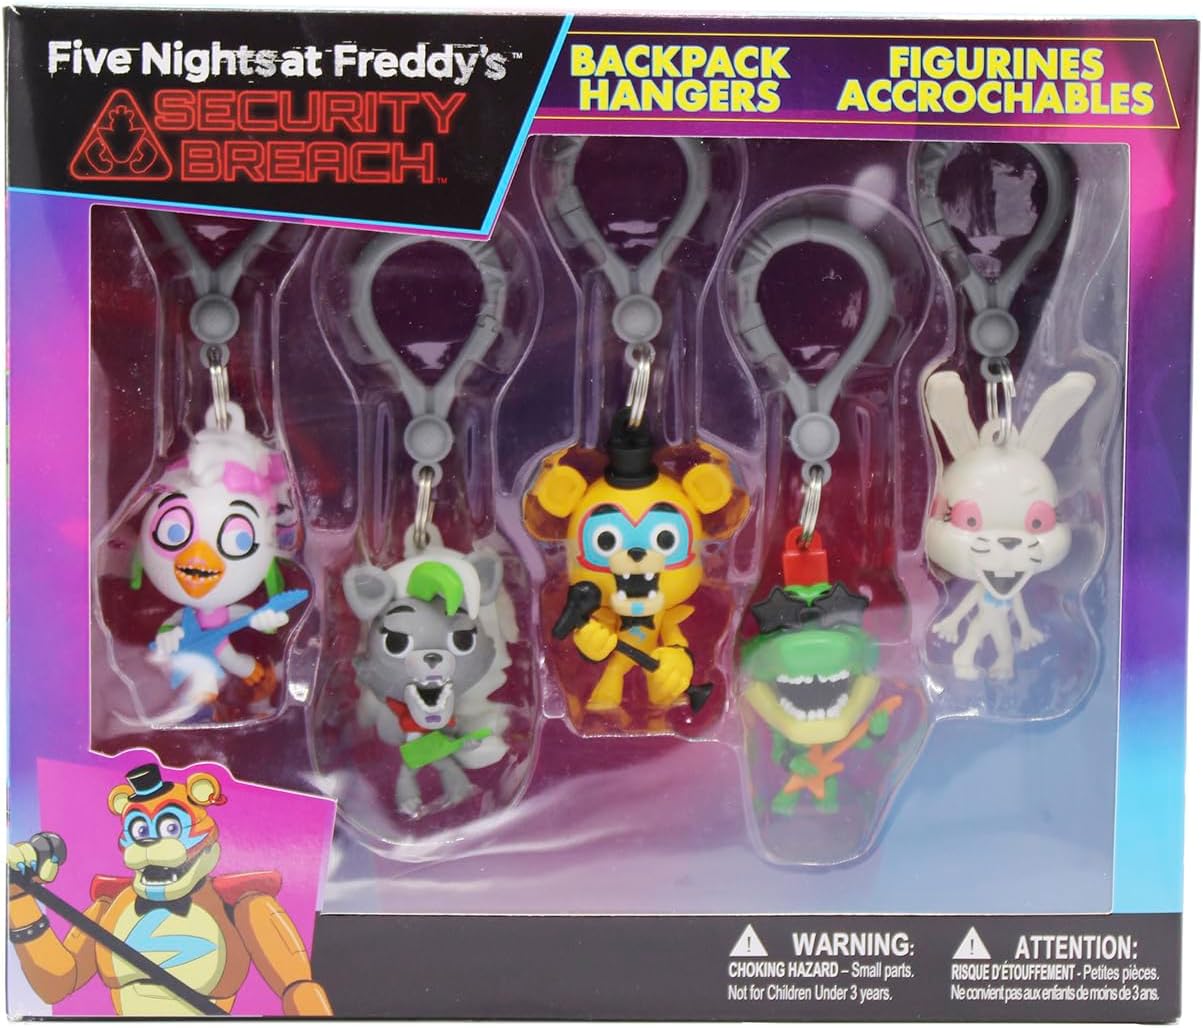 Five Nights at Freddy's Security Breach Backpack Hangers 5-Pack